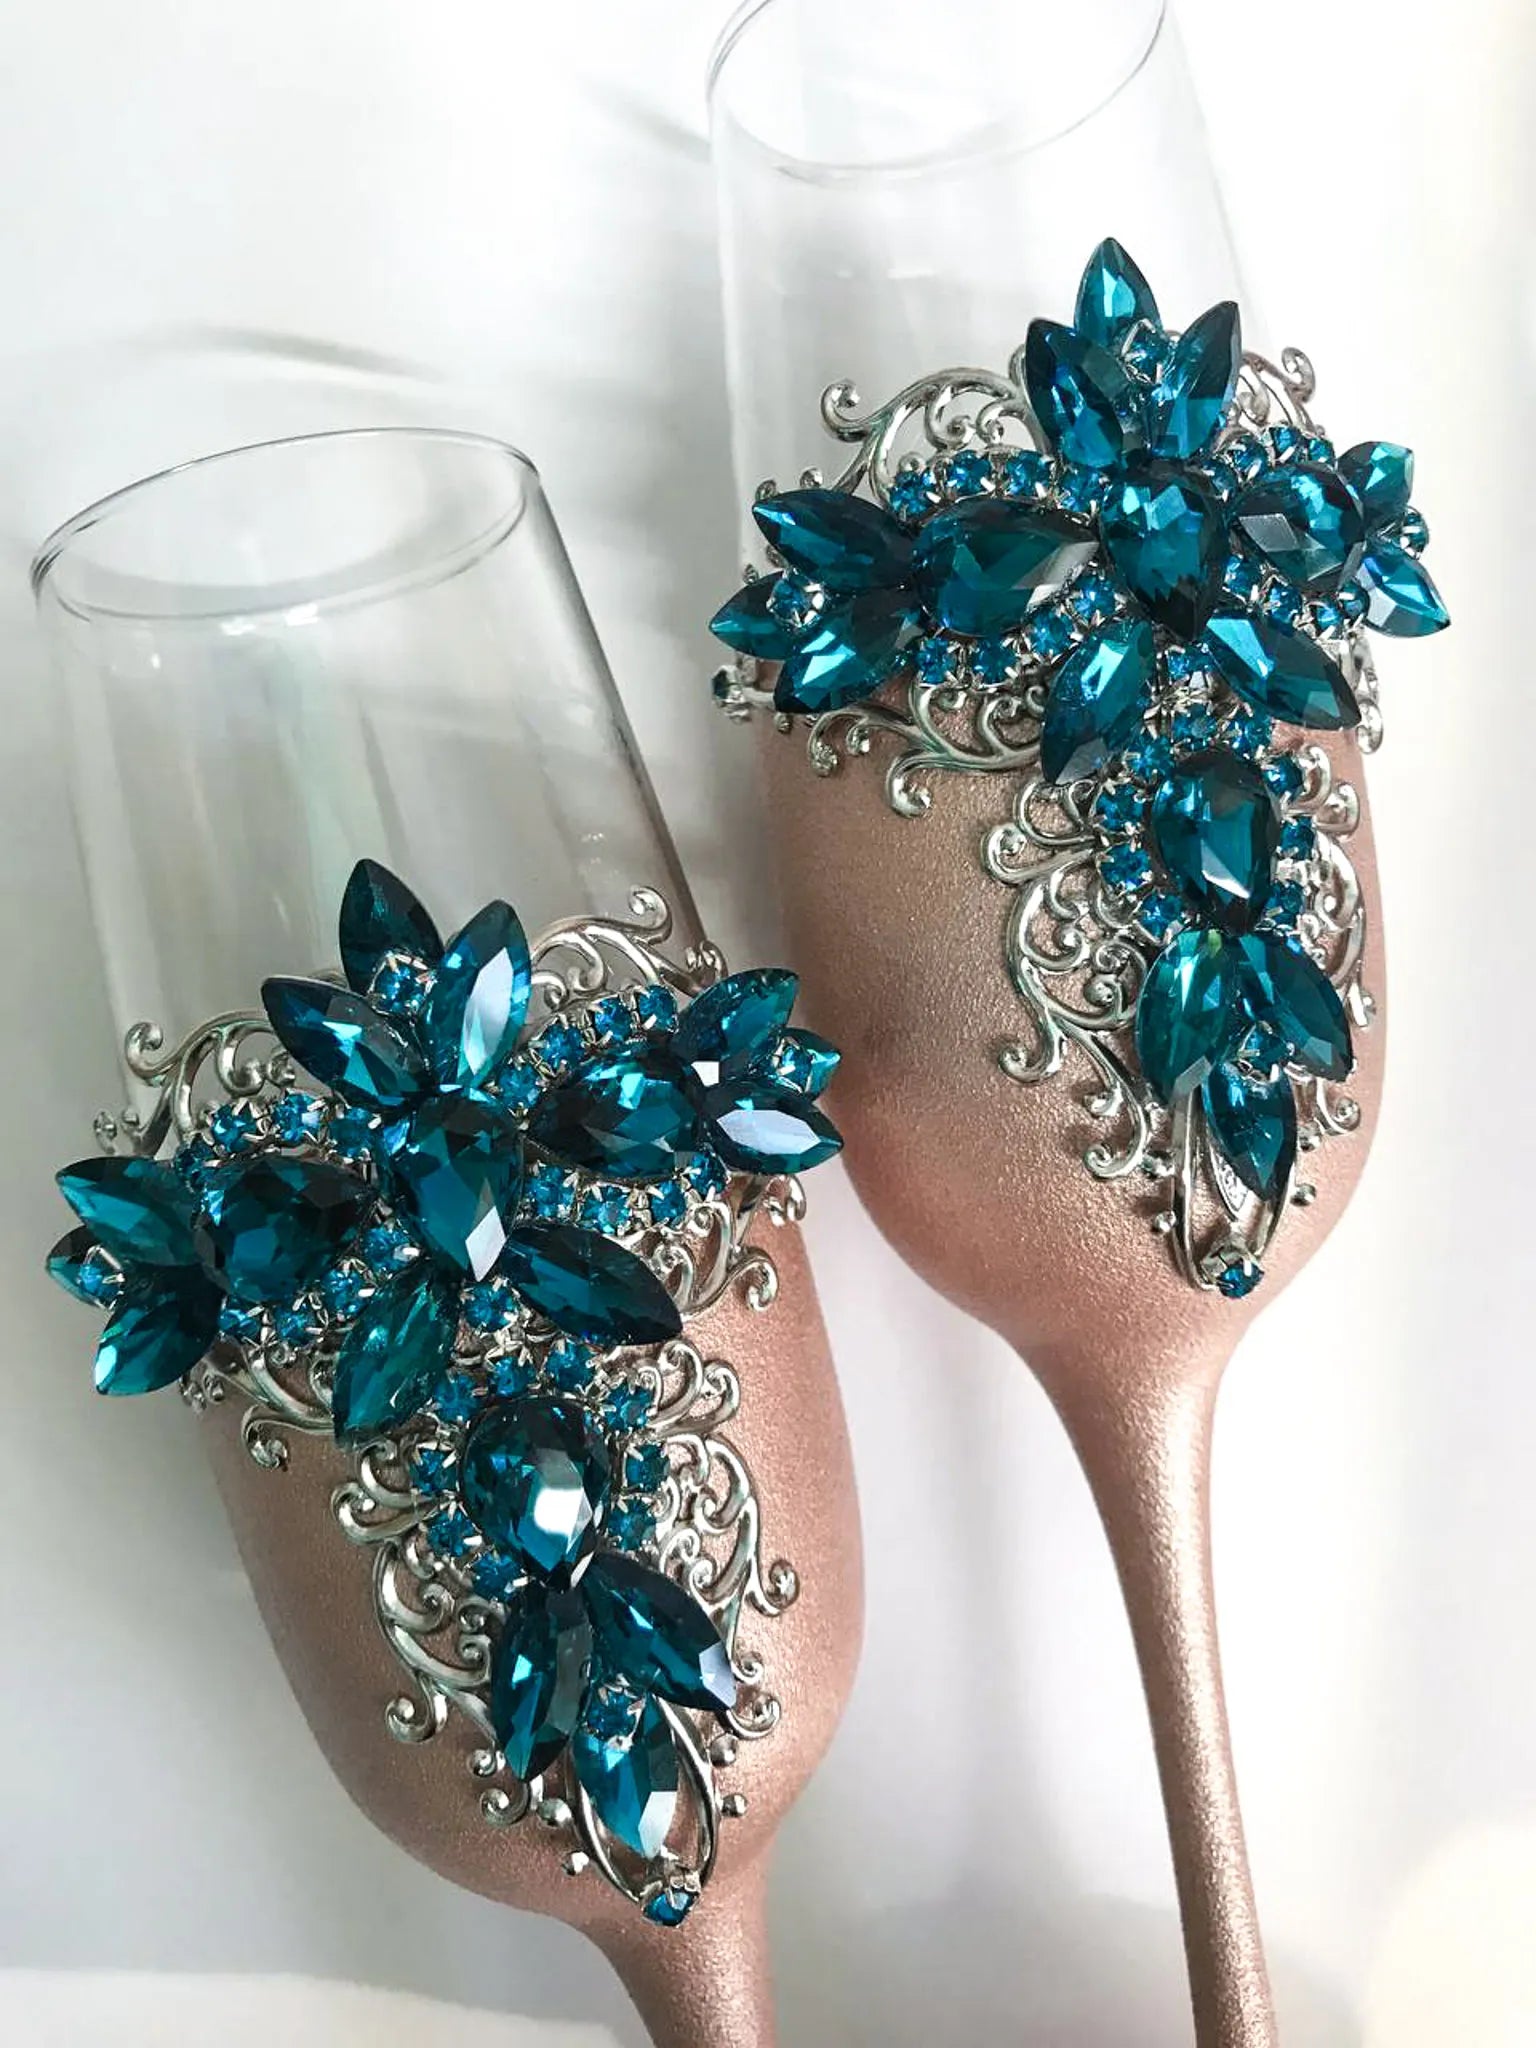 Stylish Cake Server Set with Blue Teal Crystals